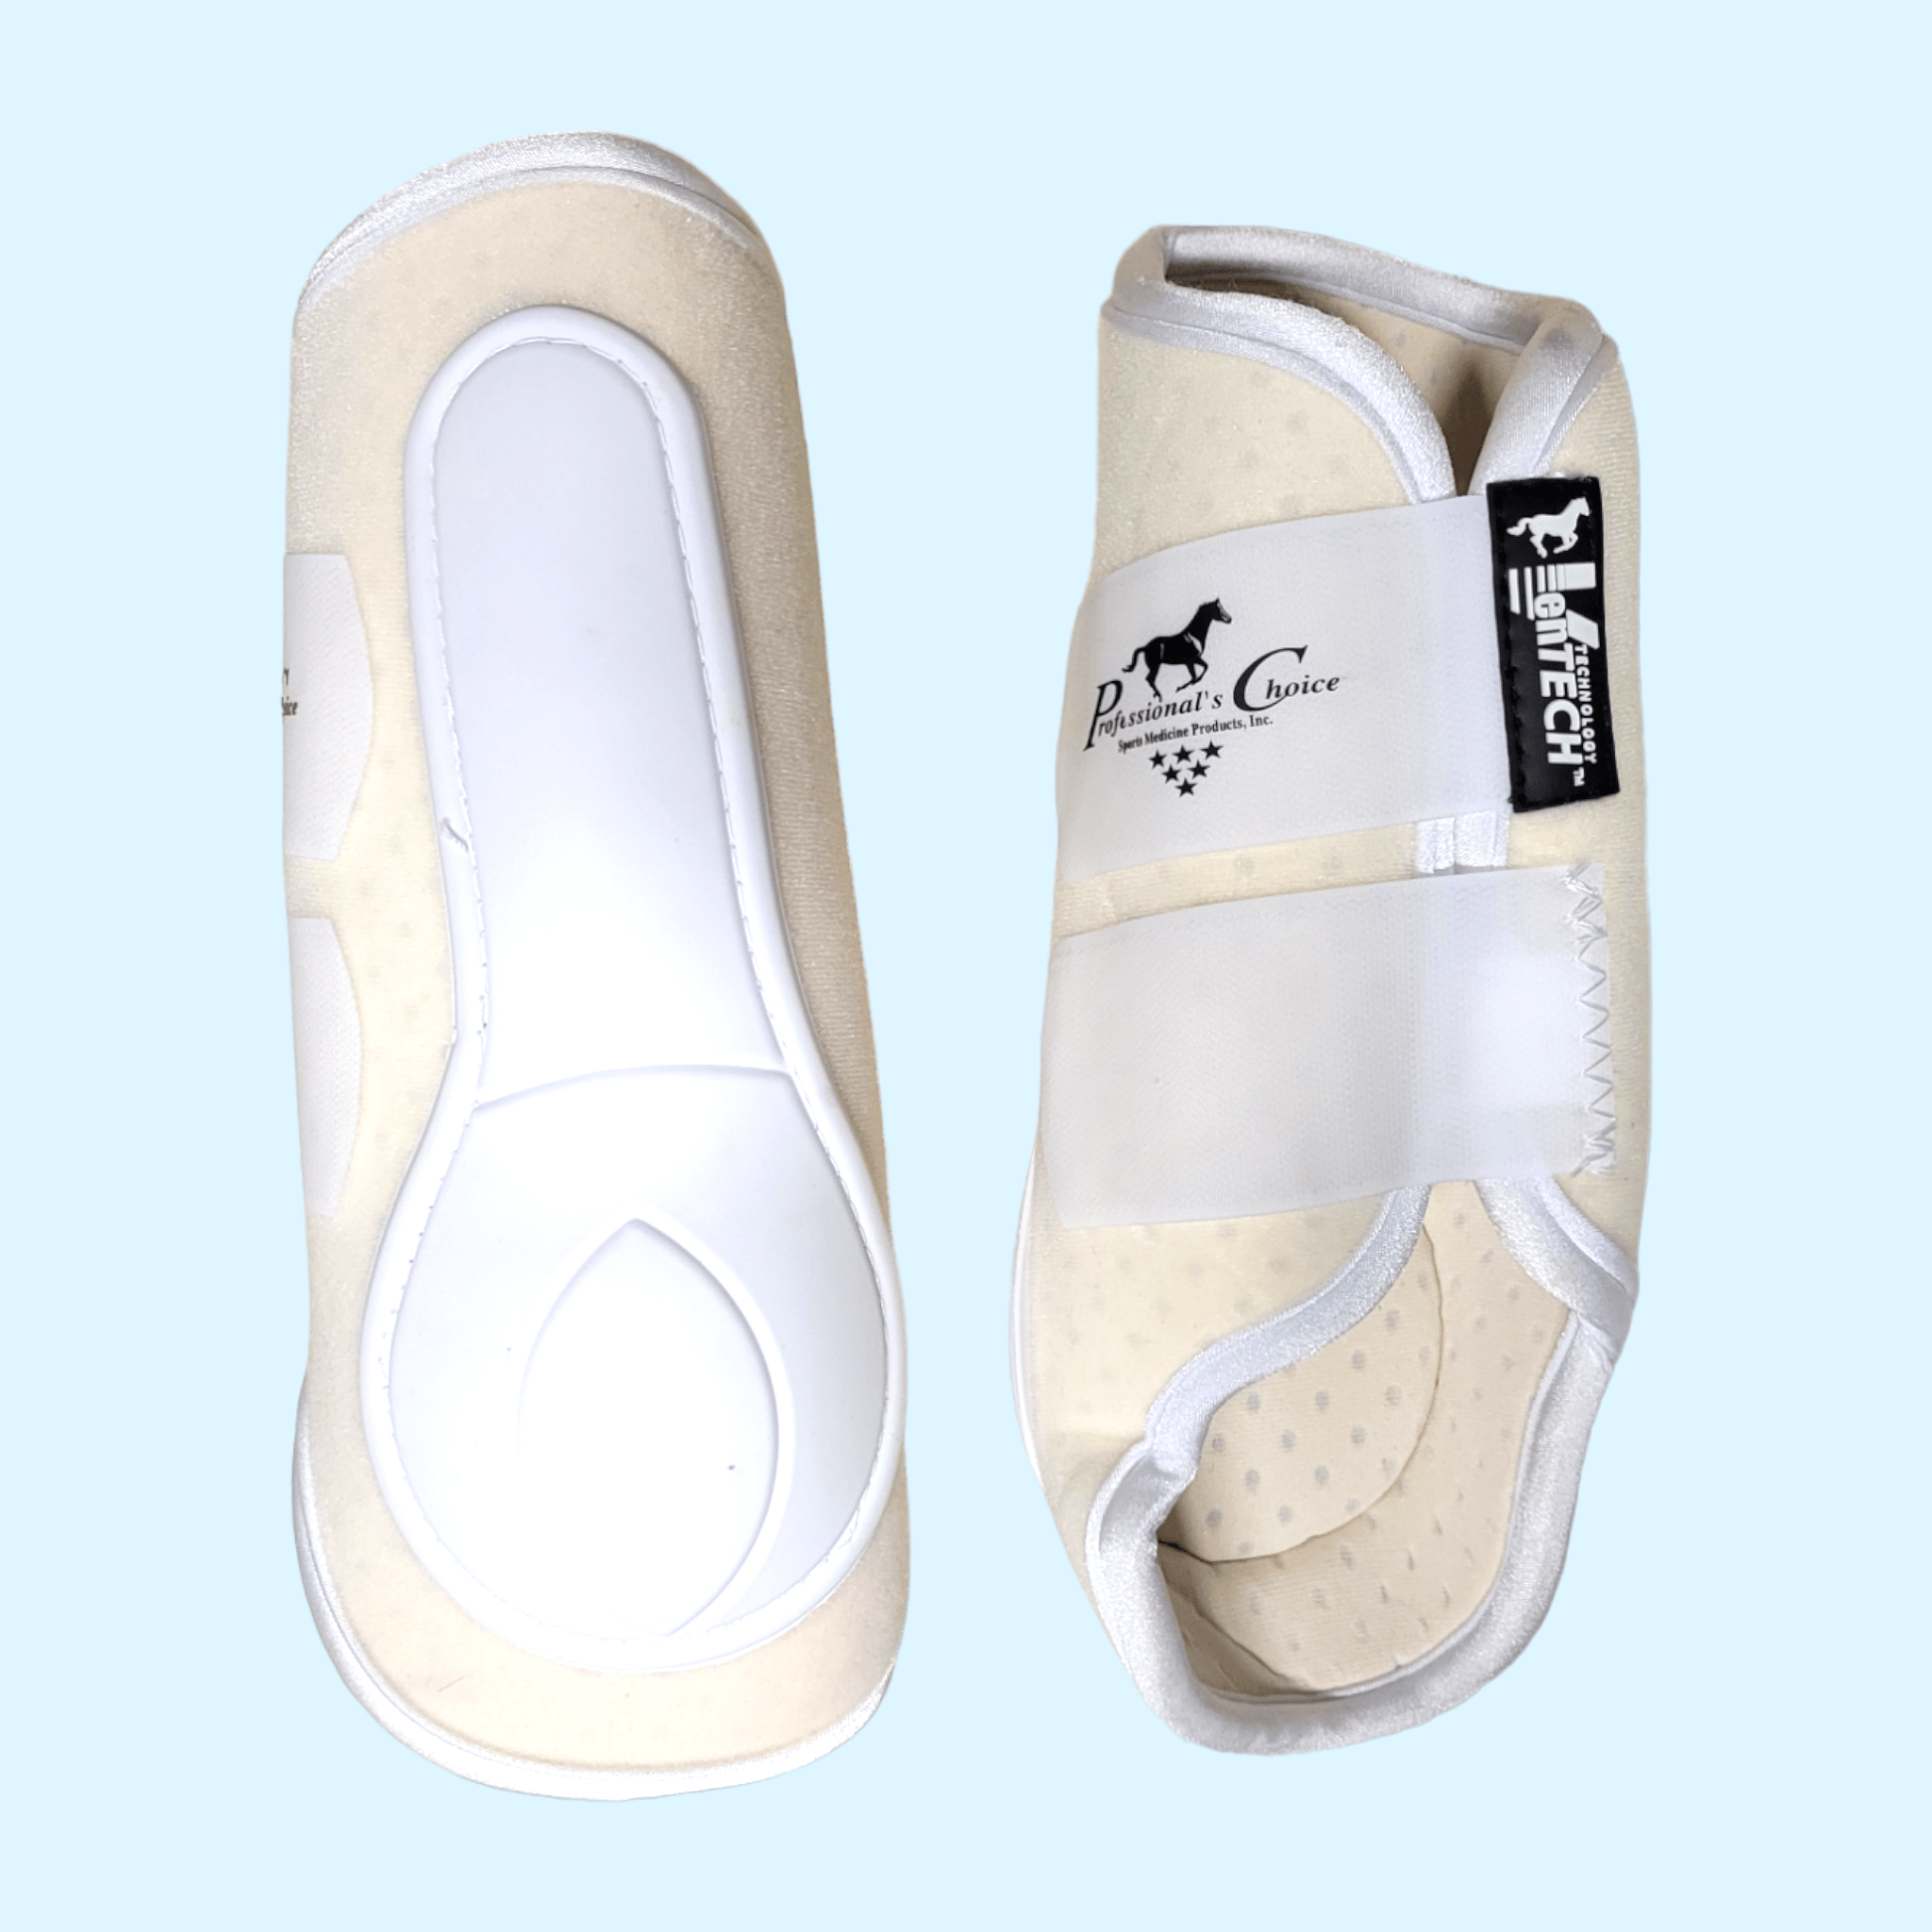 Professional's Choice VenTECH Splint Boots in White - Large